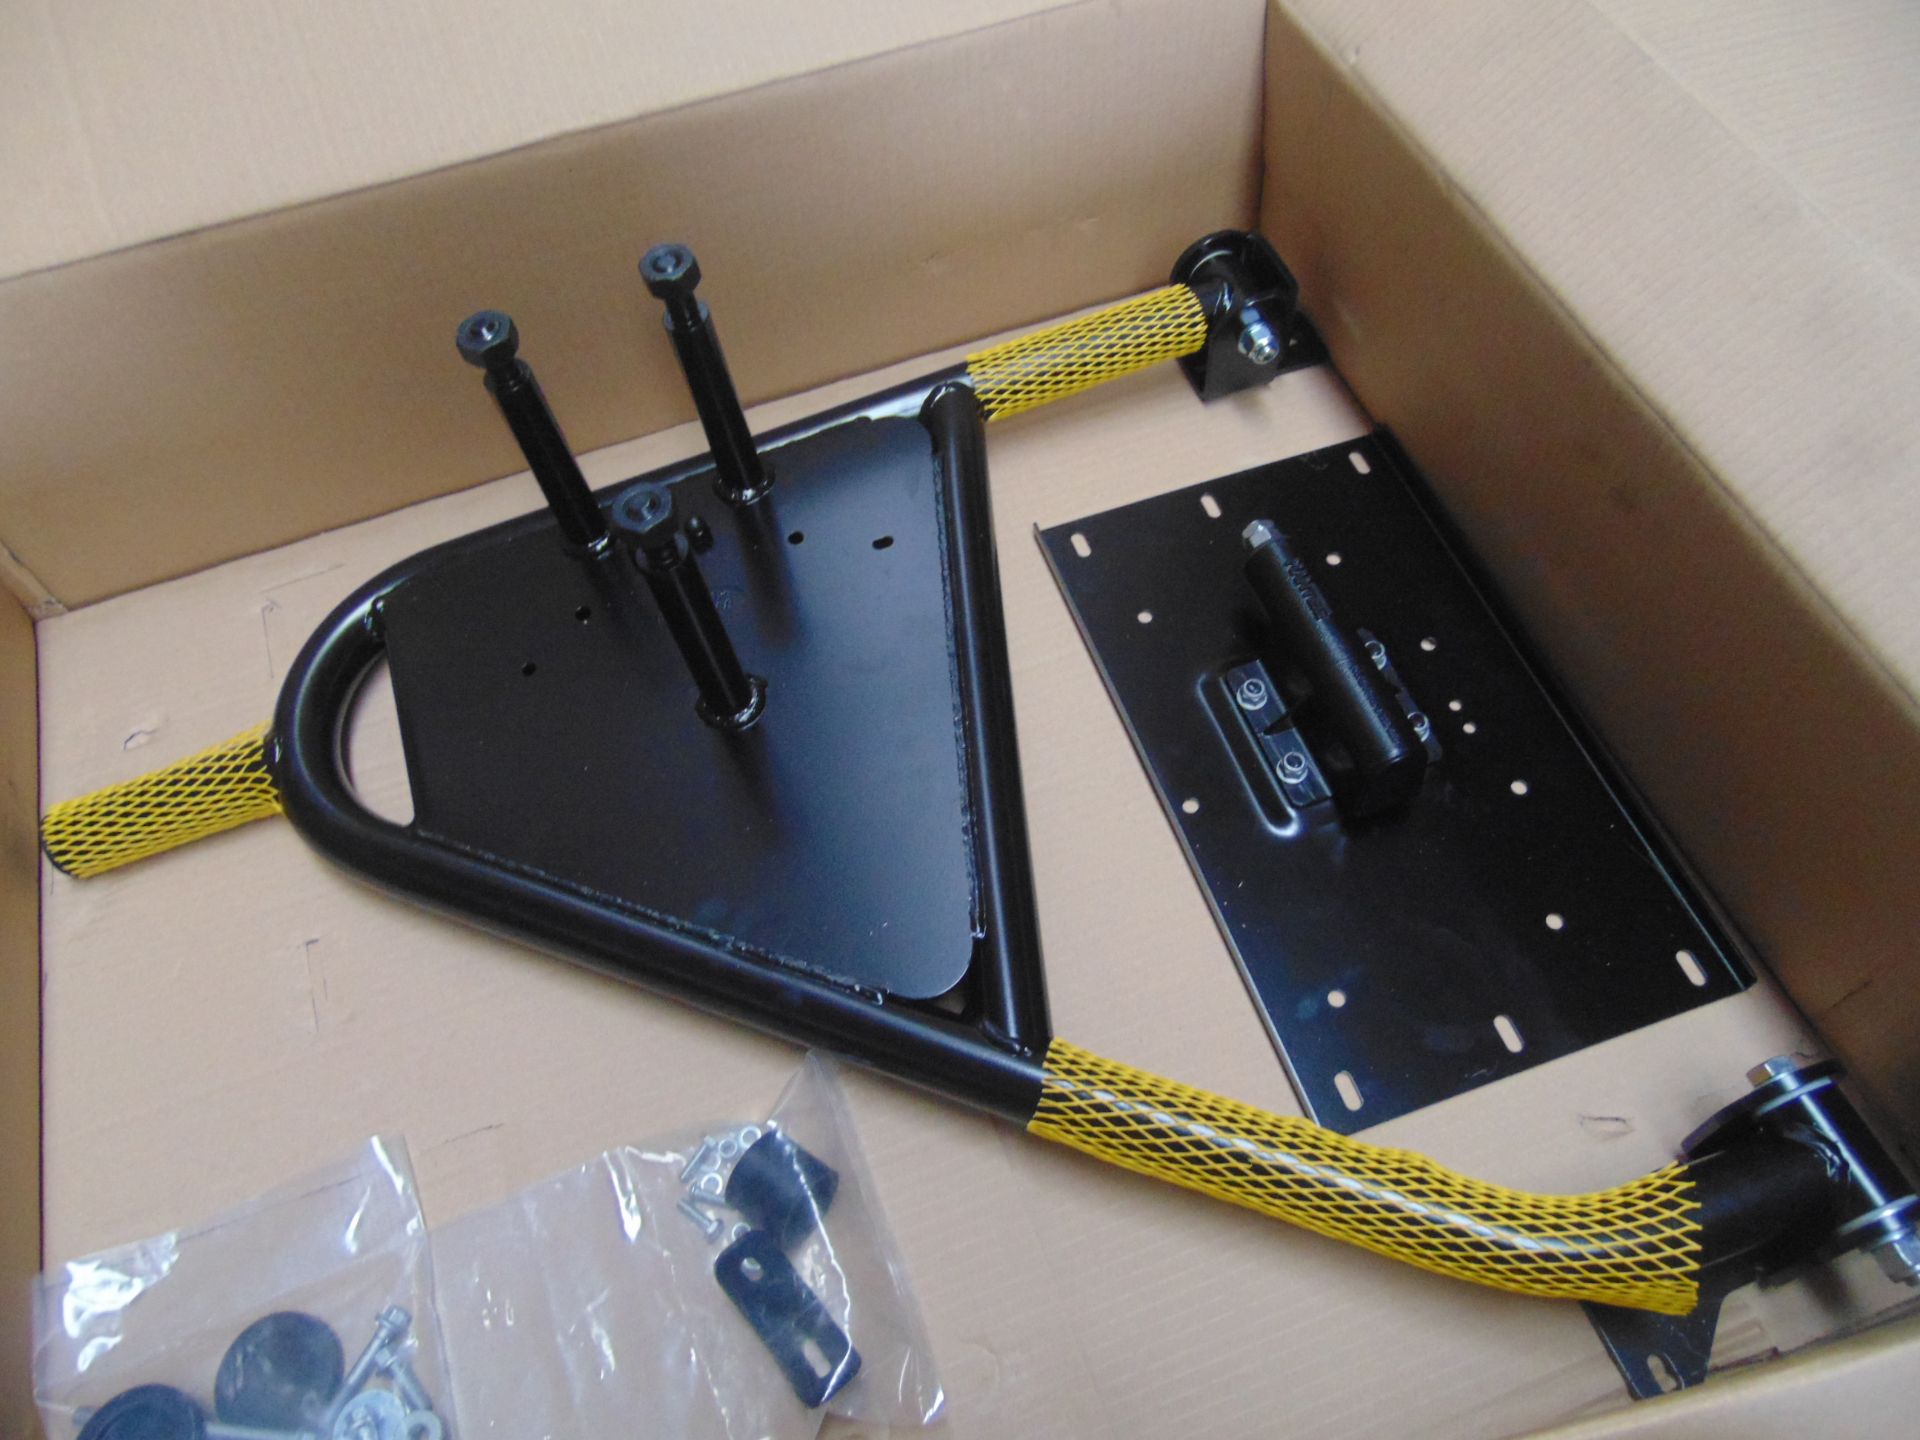 50 x Land Rover Defender Swing Out Spare Wheel Carrier Kits P/No VPLDR0130 - Image 5 of 11